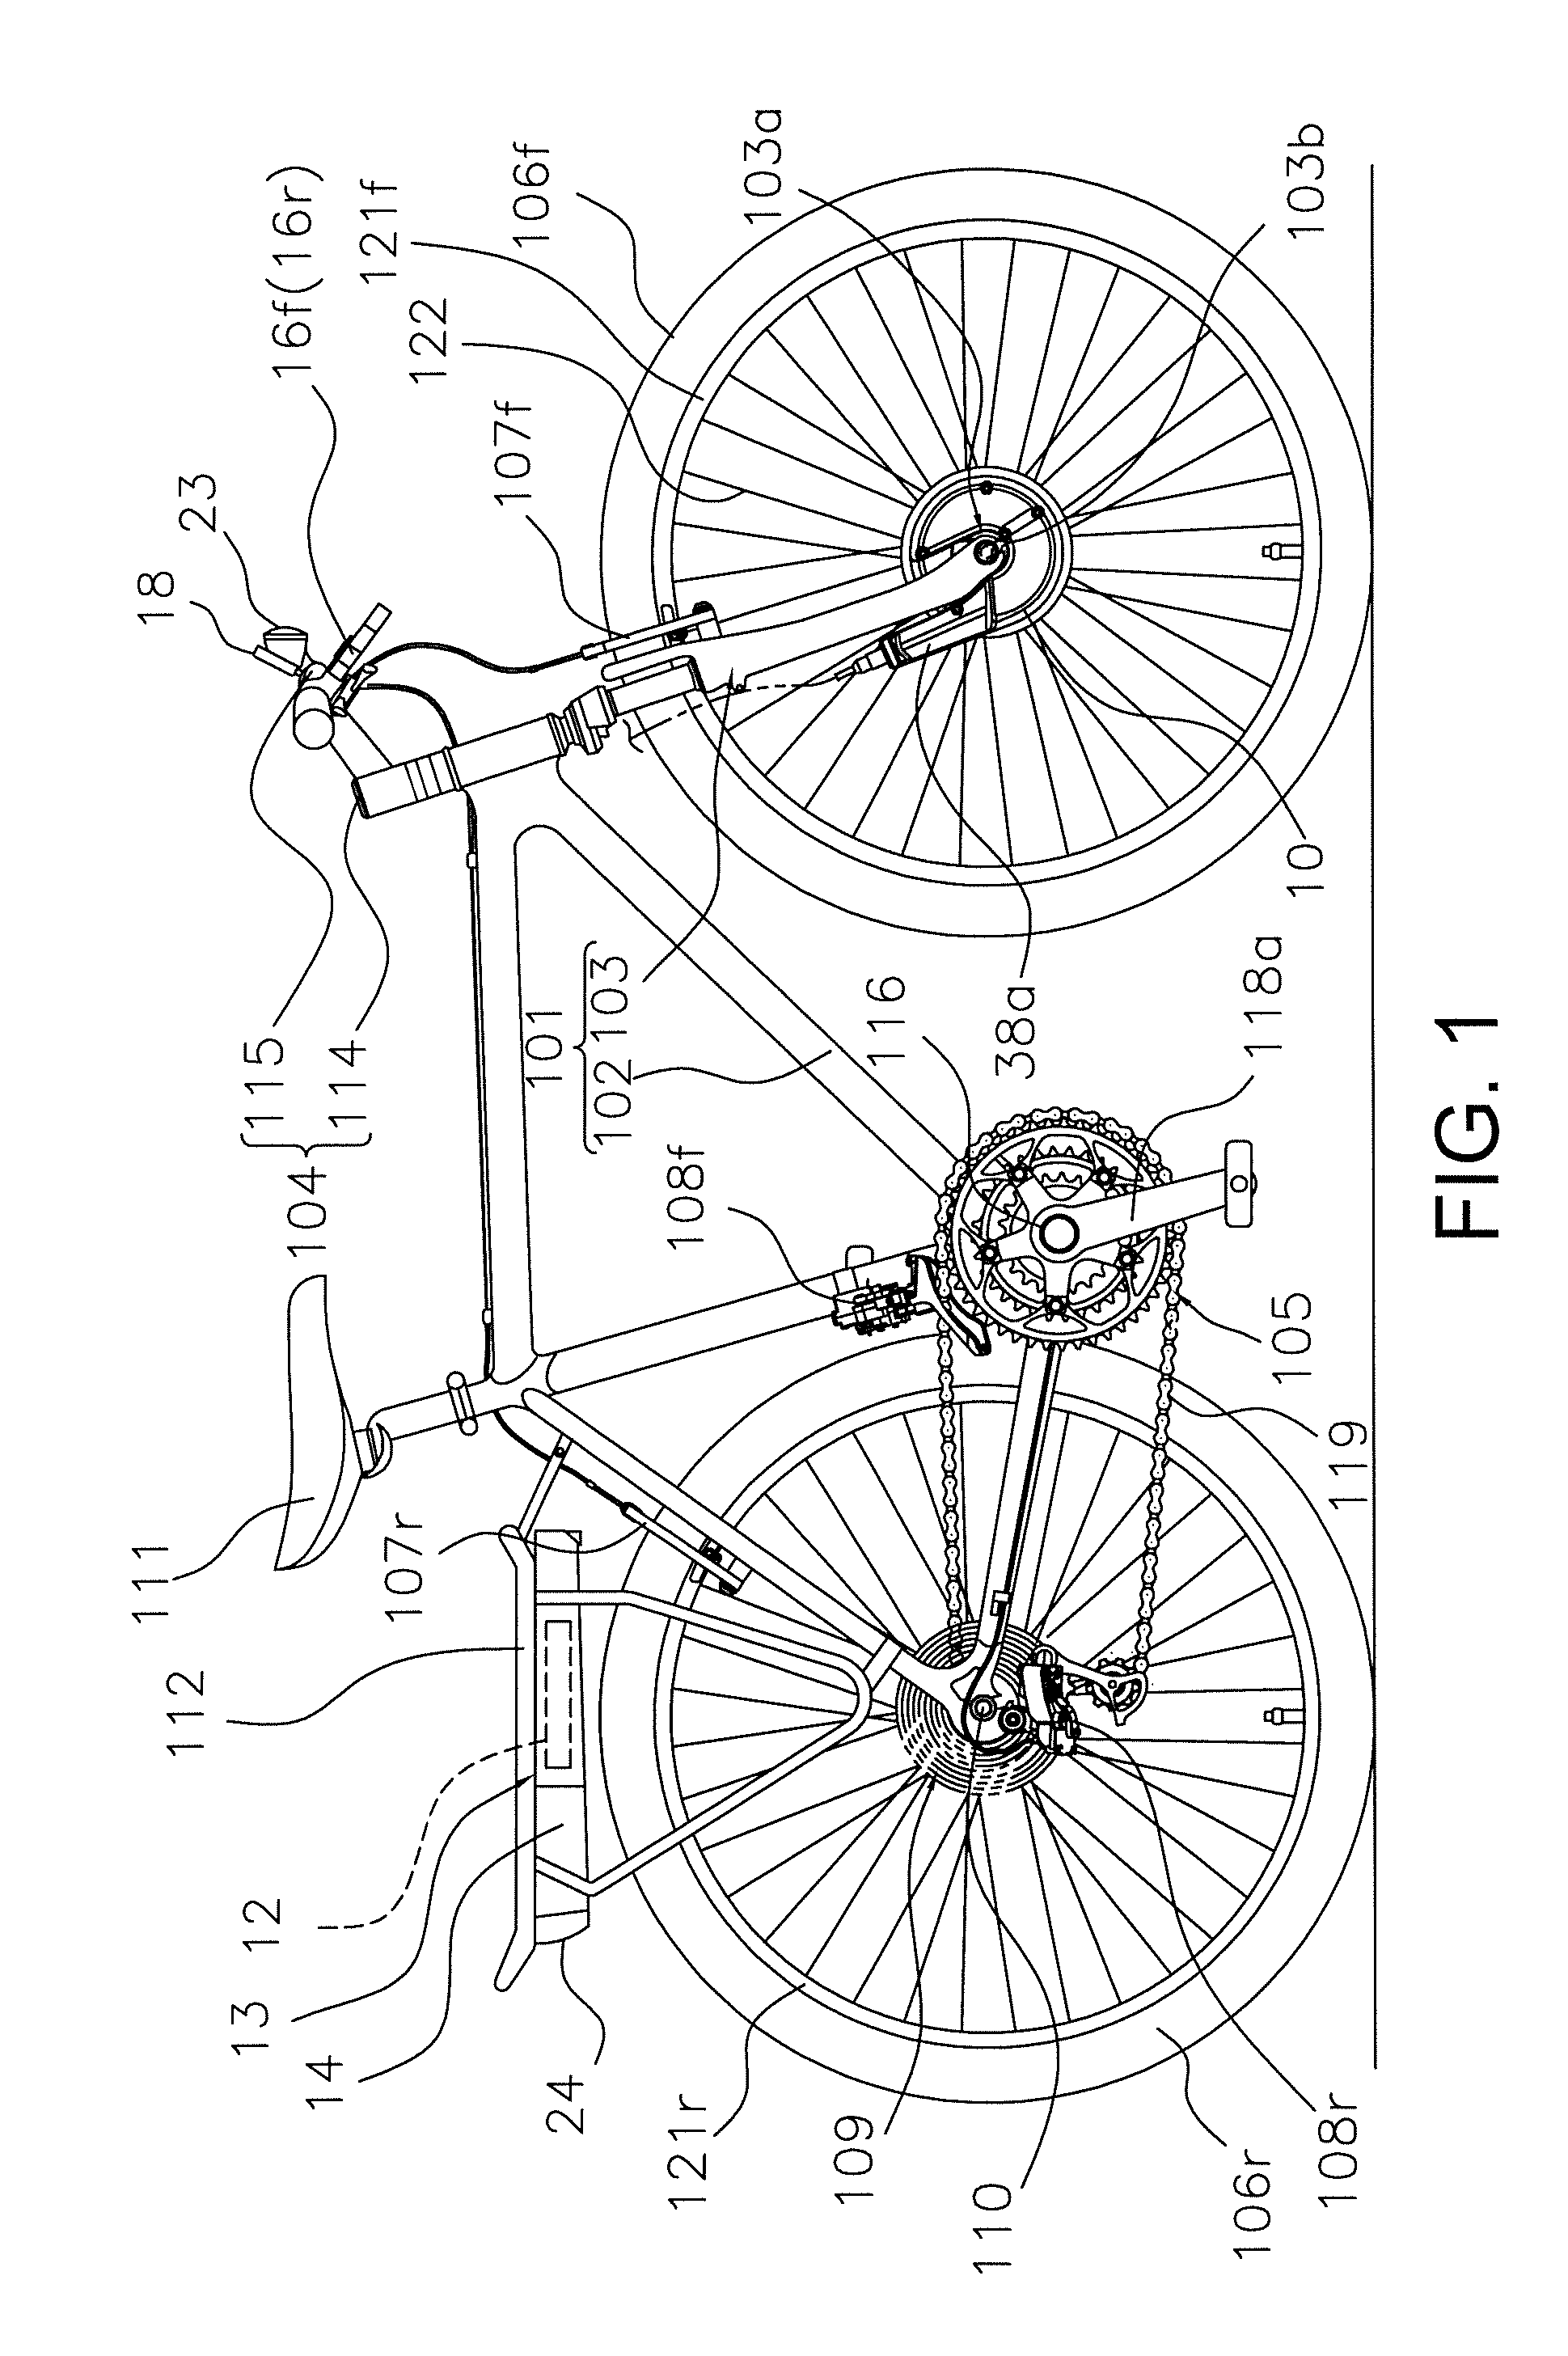 Auxiliary bicycle power supply system